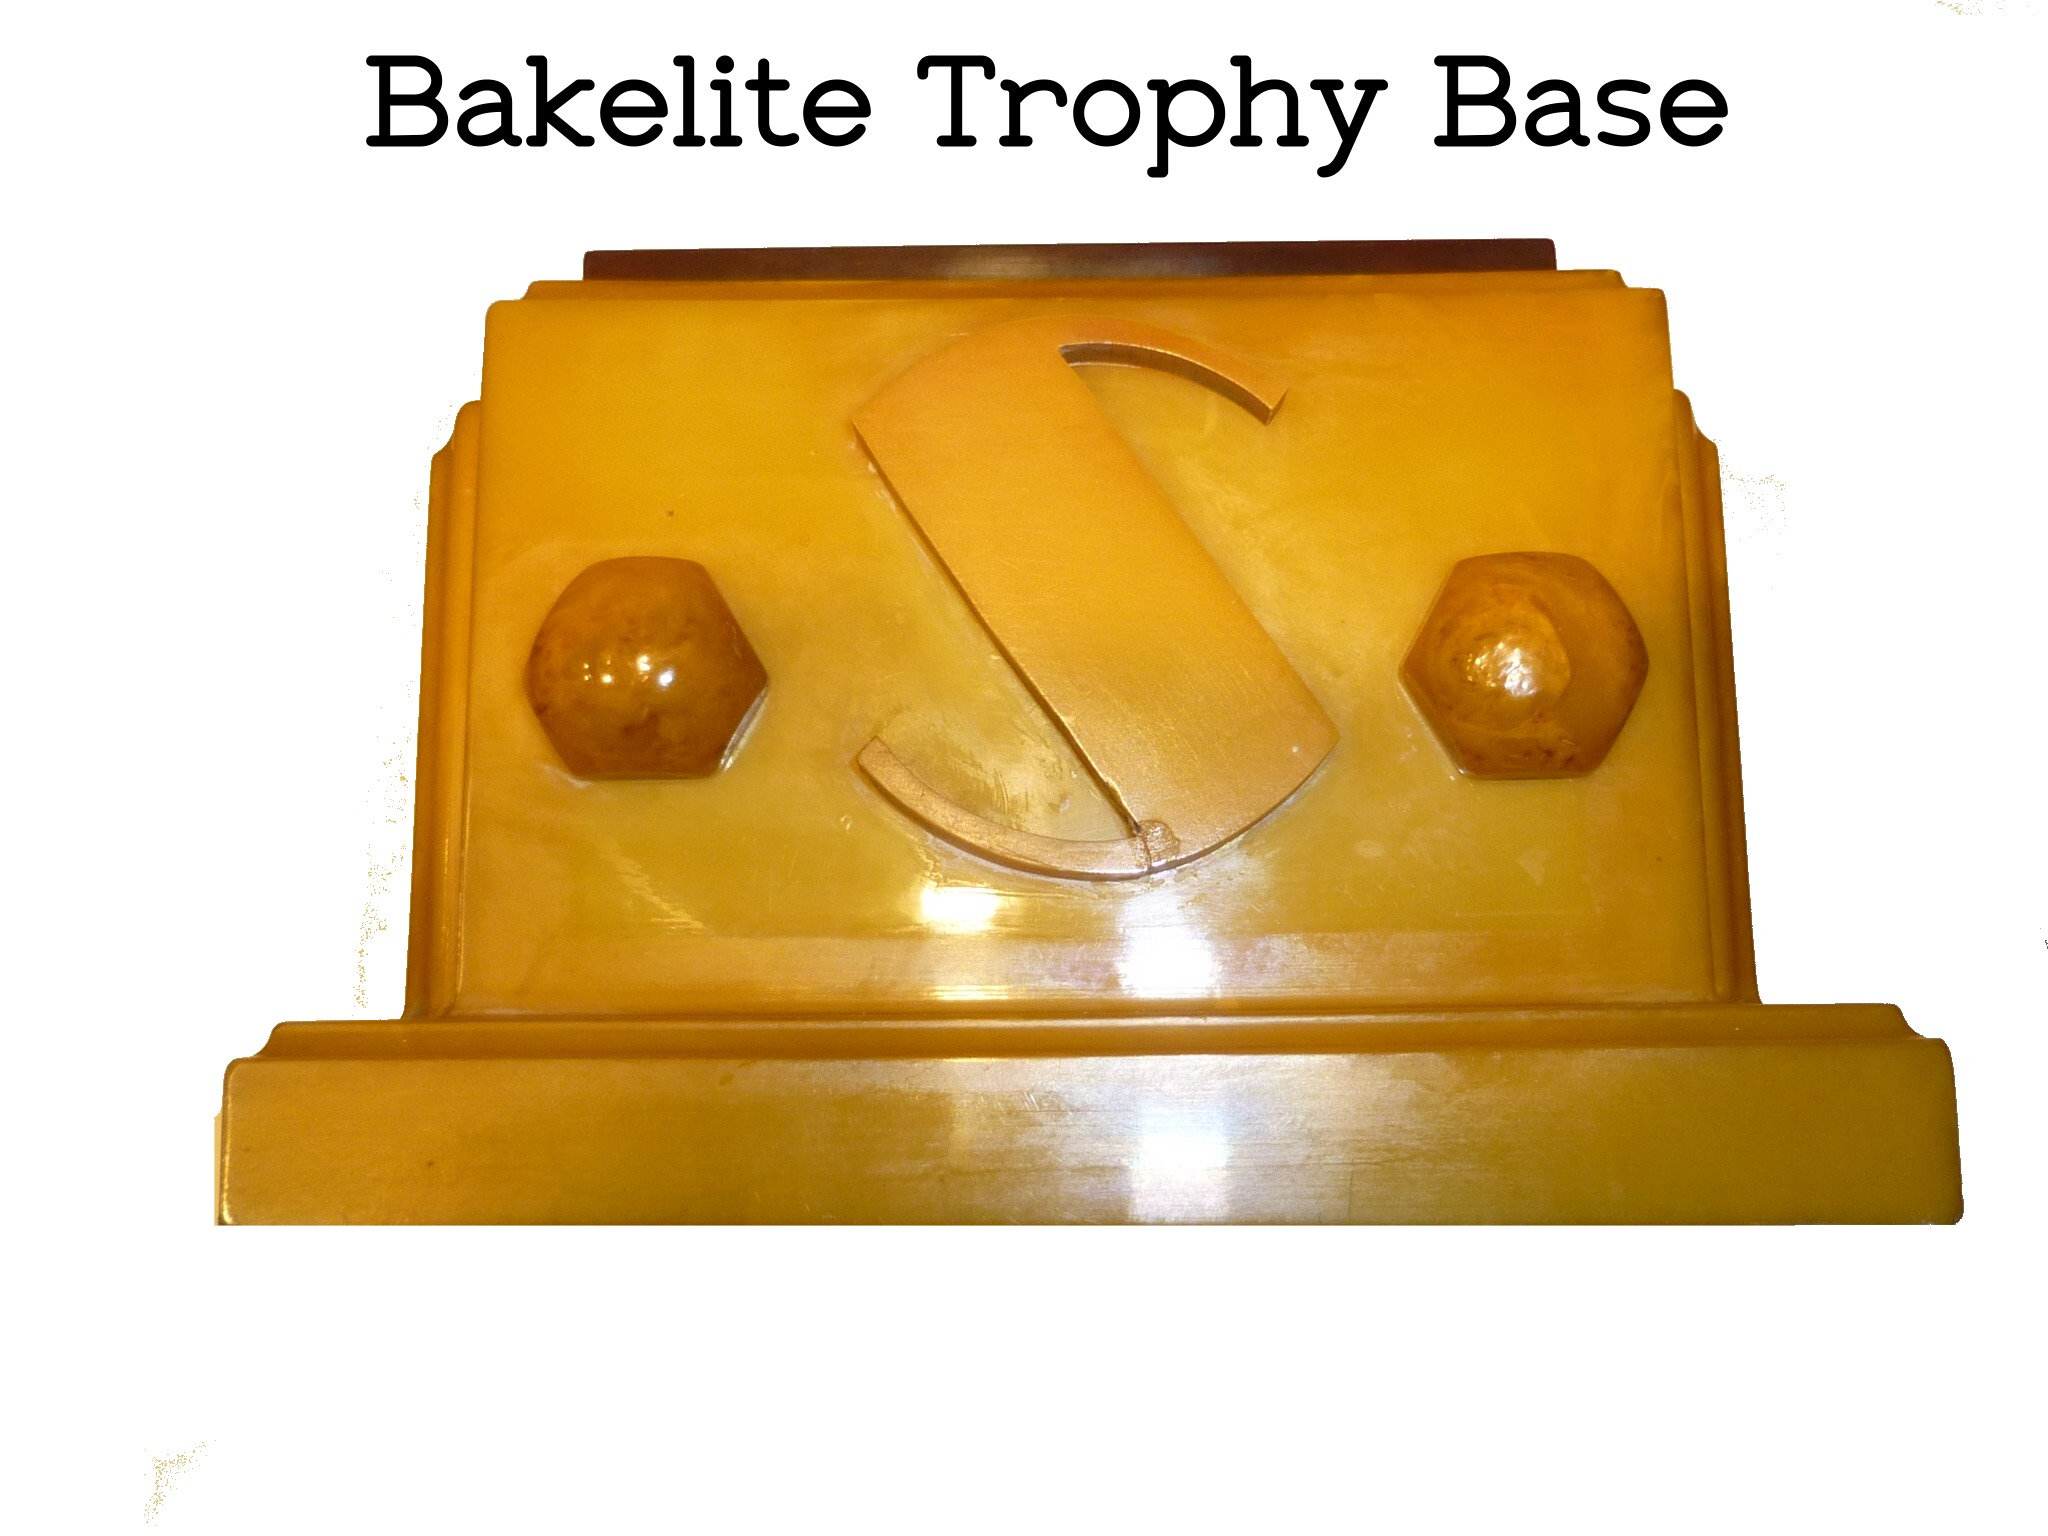 Vintage Bakelite Trophy Base. Has an s Added to the Front. Tested,  Guaranteed Bakelite About 5 by 6. Weighs 740 Grams. -  Norway